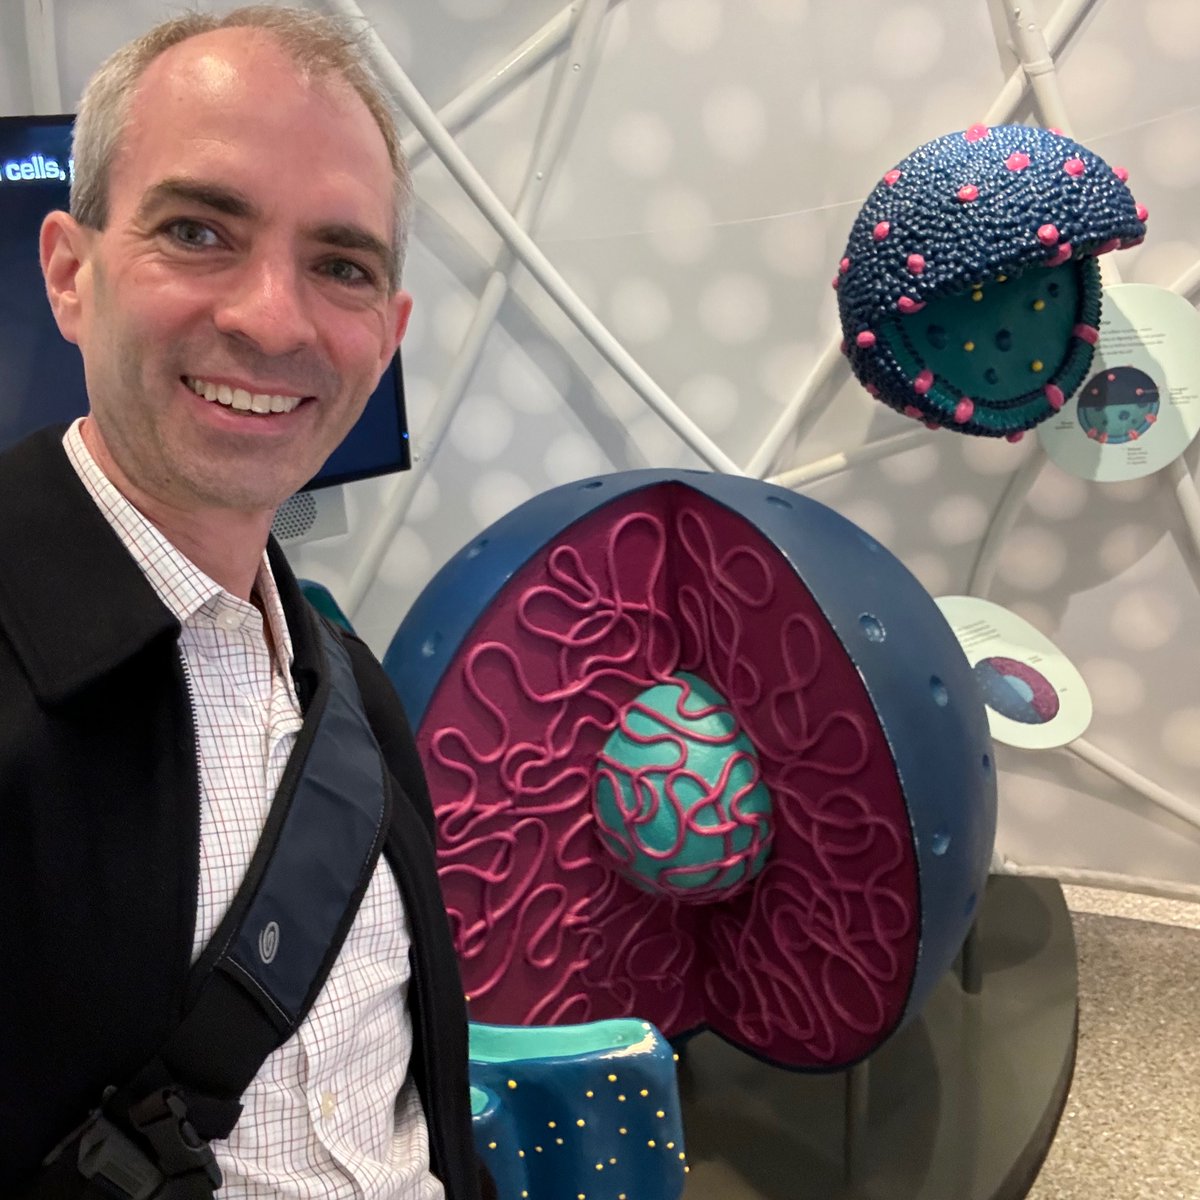 Looking forward to my seminar tomorrow at @UMich_MCDB and share our recent work (thanks to @morgan_desantis and @suehammoud1 for hosting). Hope to see you there. Tomorrow, we rewire the cell. Today I got to walk inside a cell and unpack the nucleus at the cool UMich cell exhibits